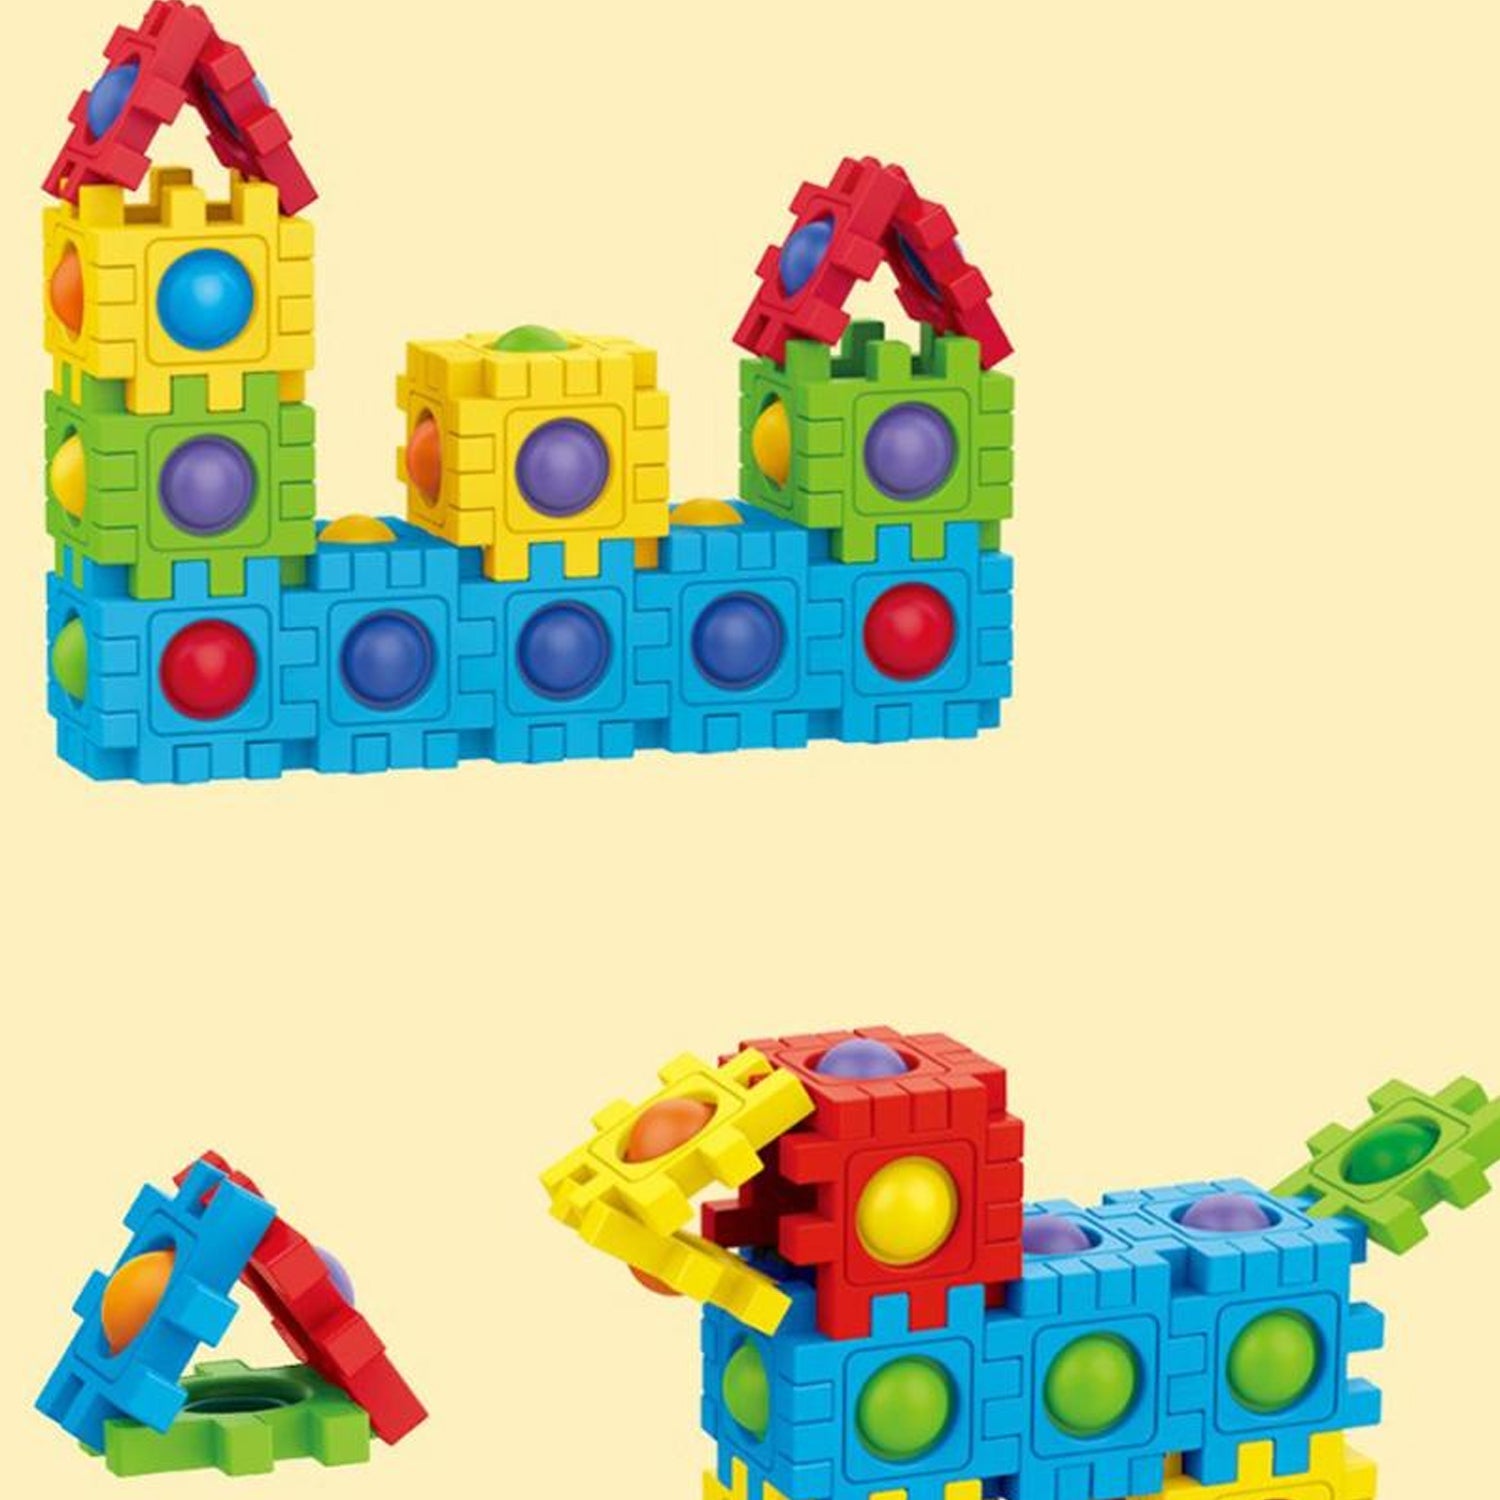 4473 Popit Building Blocks Toy For Kids & Adult Use ( 28 pcs Product ) 